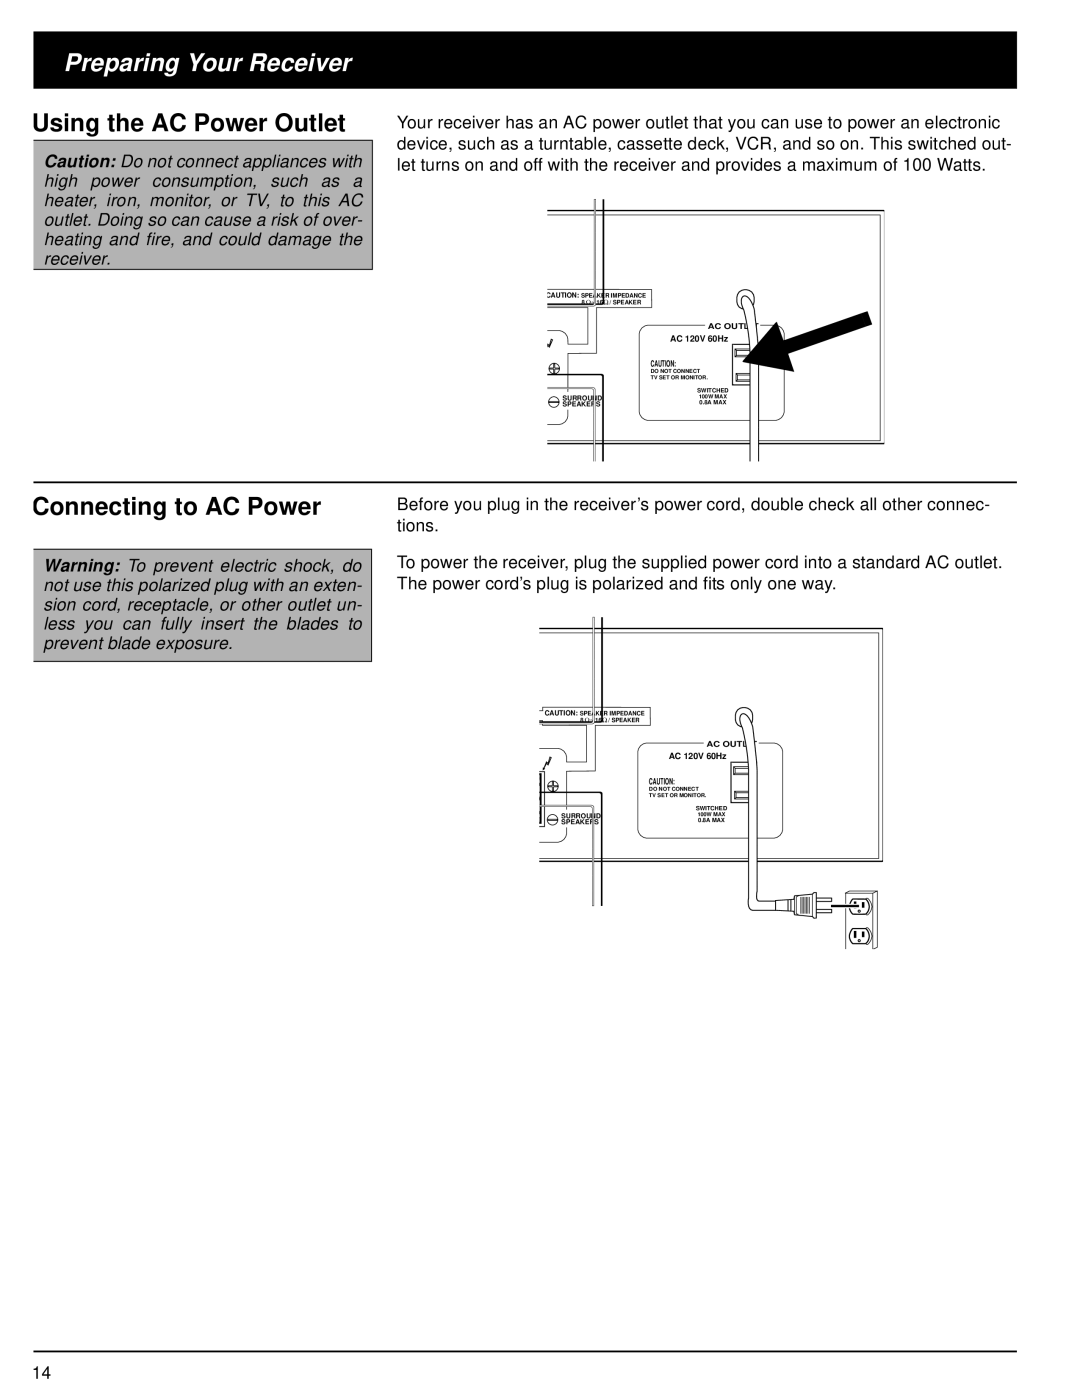 Optimus 31-3042 owner manual Using the AC Power Outlet, Connecting to AC Power, Preparing Your Receiver 